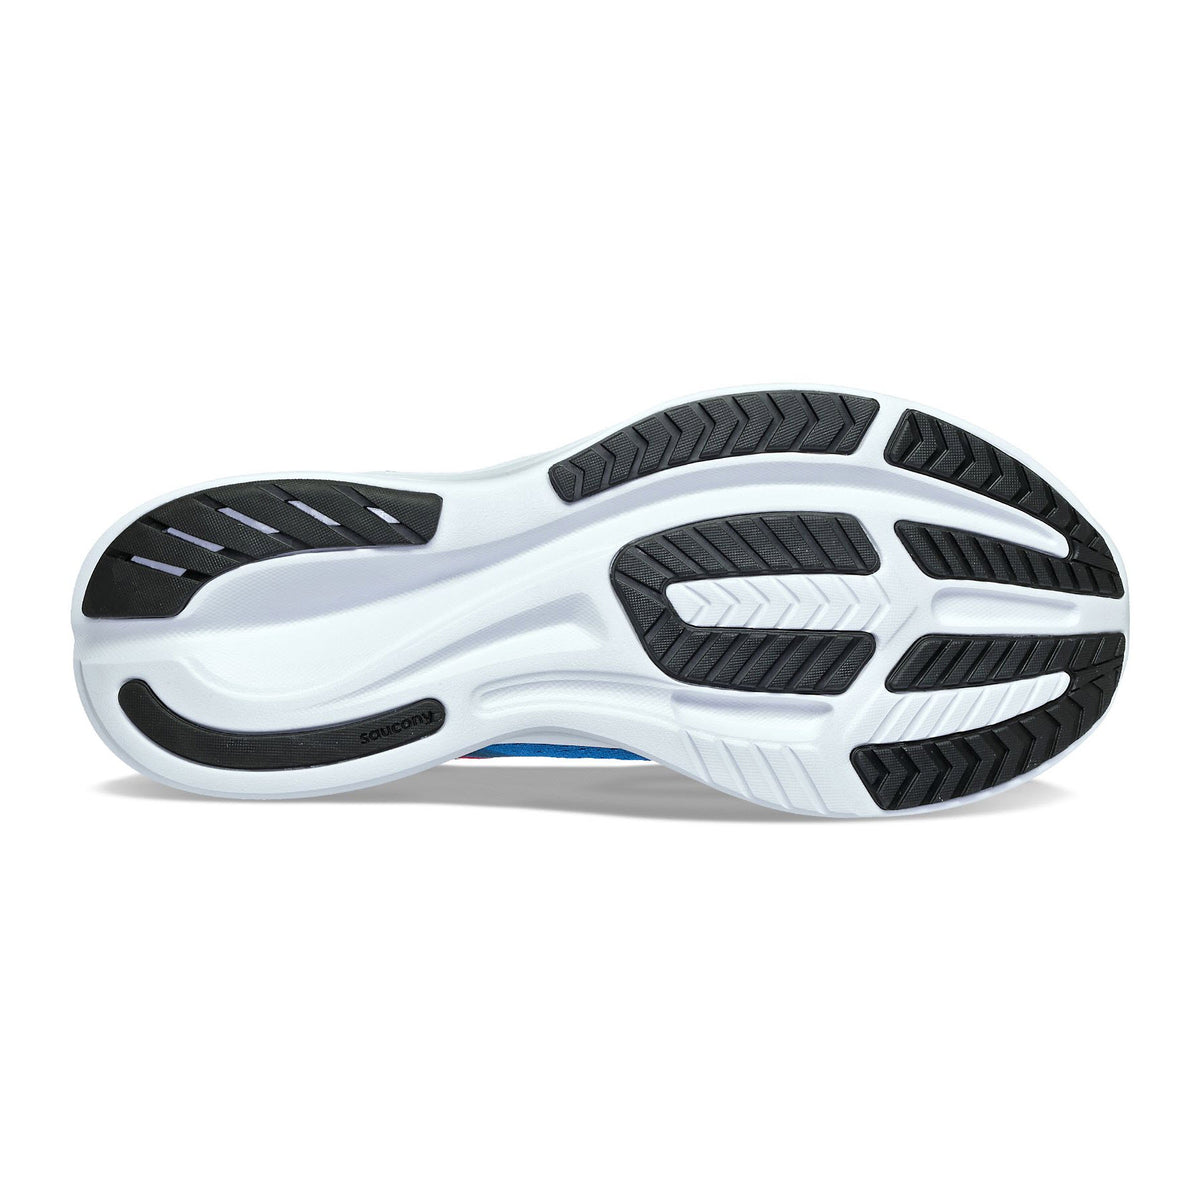 Sole of the SAUCONY RIDE 16 HYDRO/BLACK - MENS with white, black, and gray treads and PWRRUN foam cushioning technology visible.